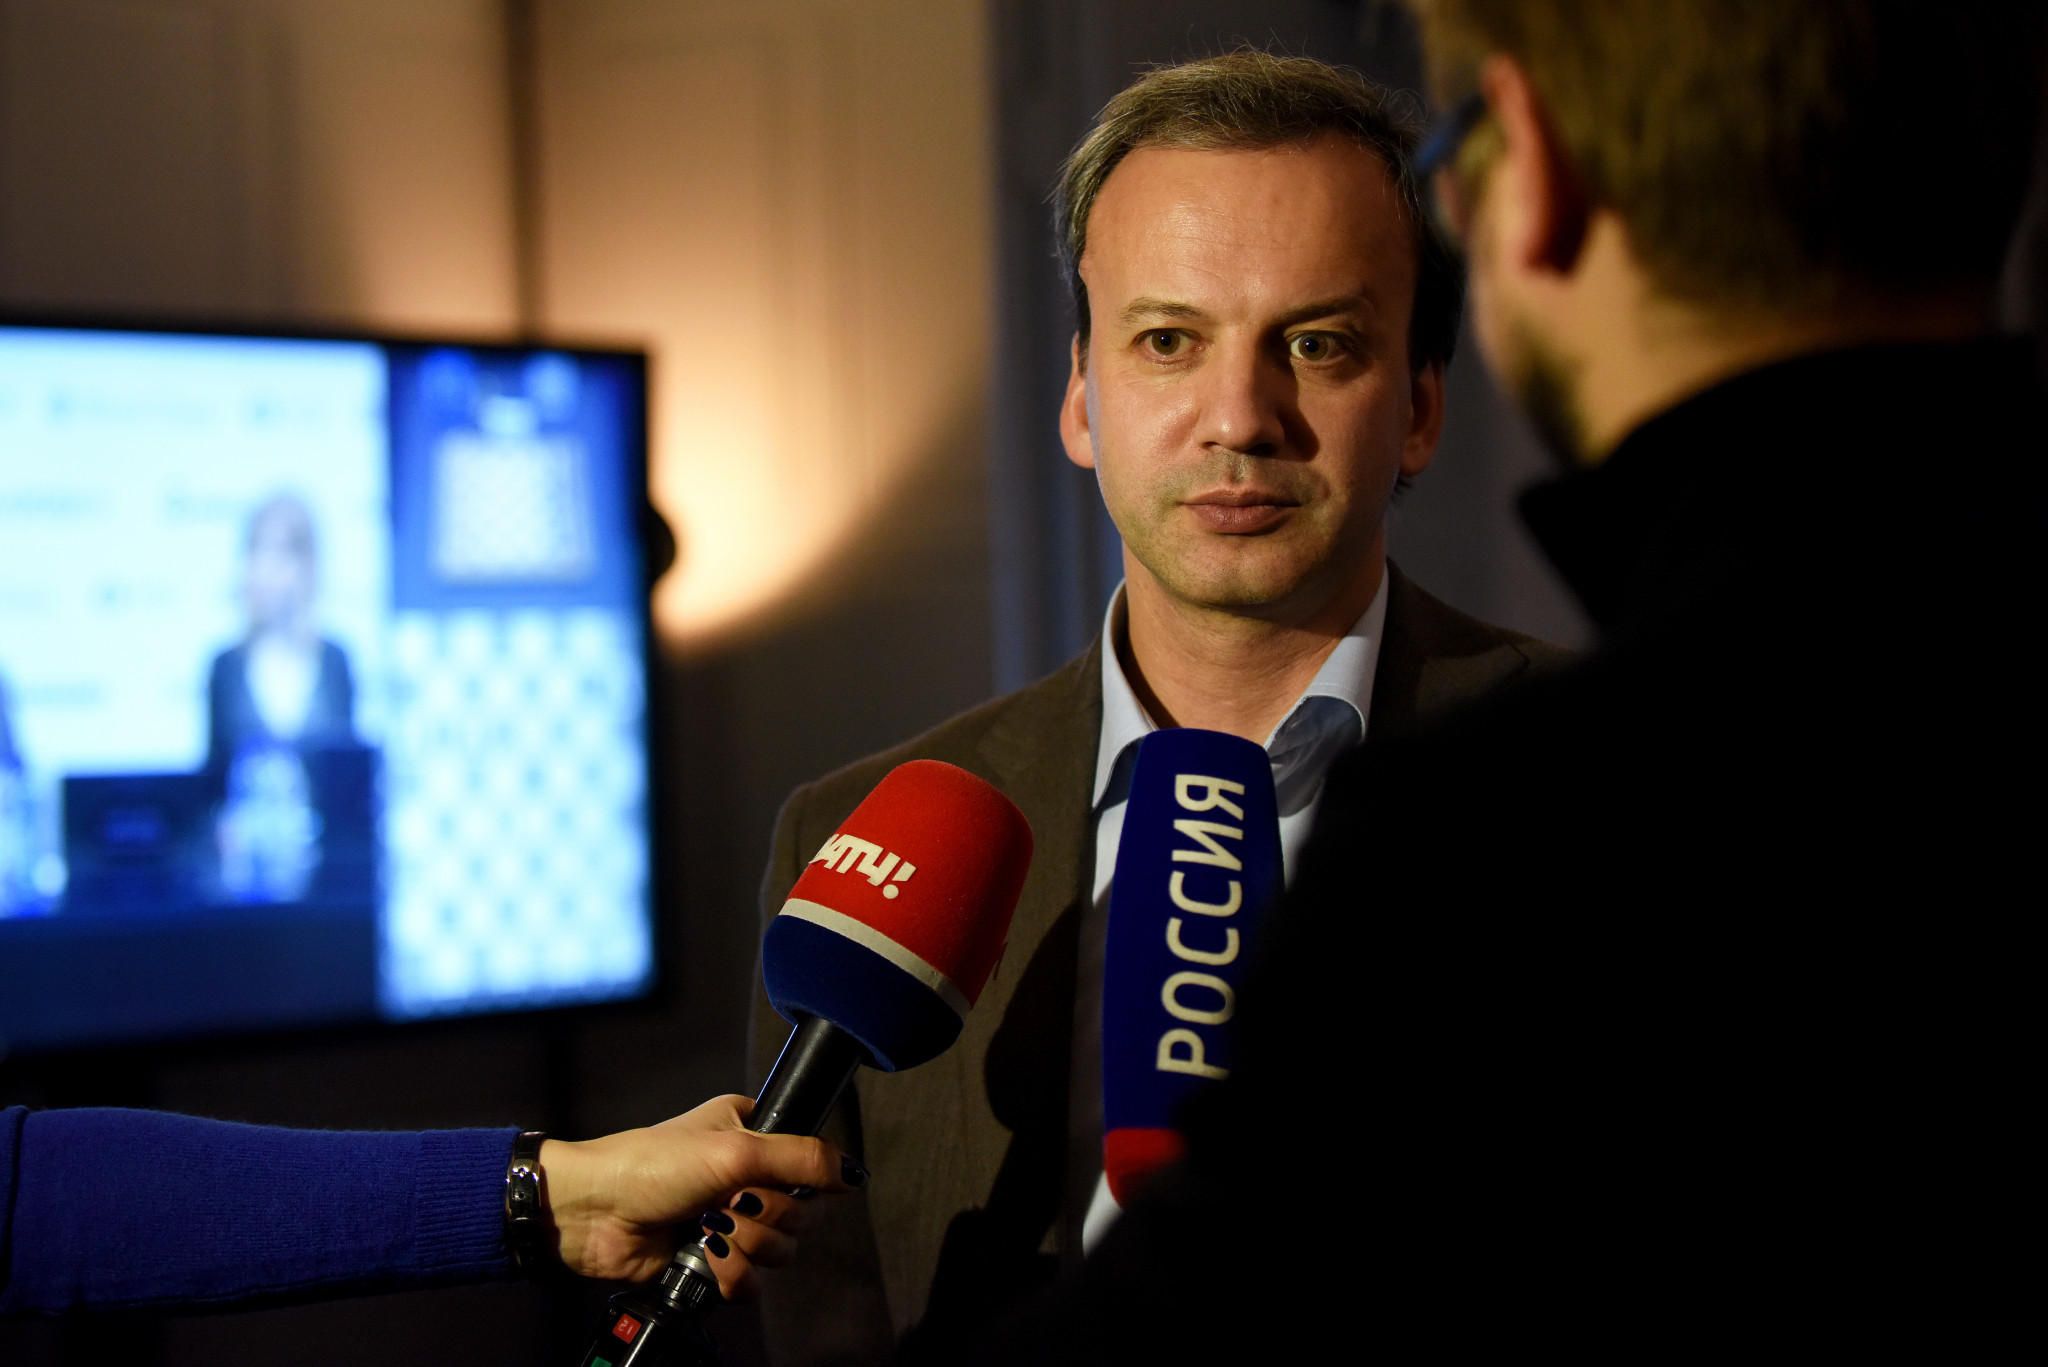 Judit Polgar says she is looking forward to working with FIDE President Arkady Dvorkovich ©Getty Images